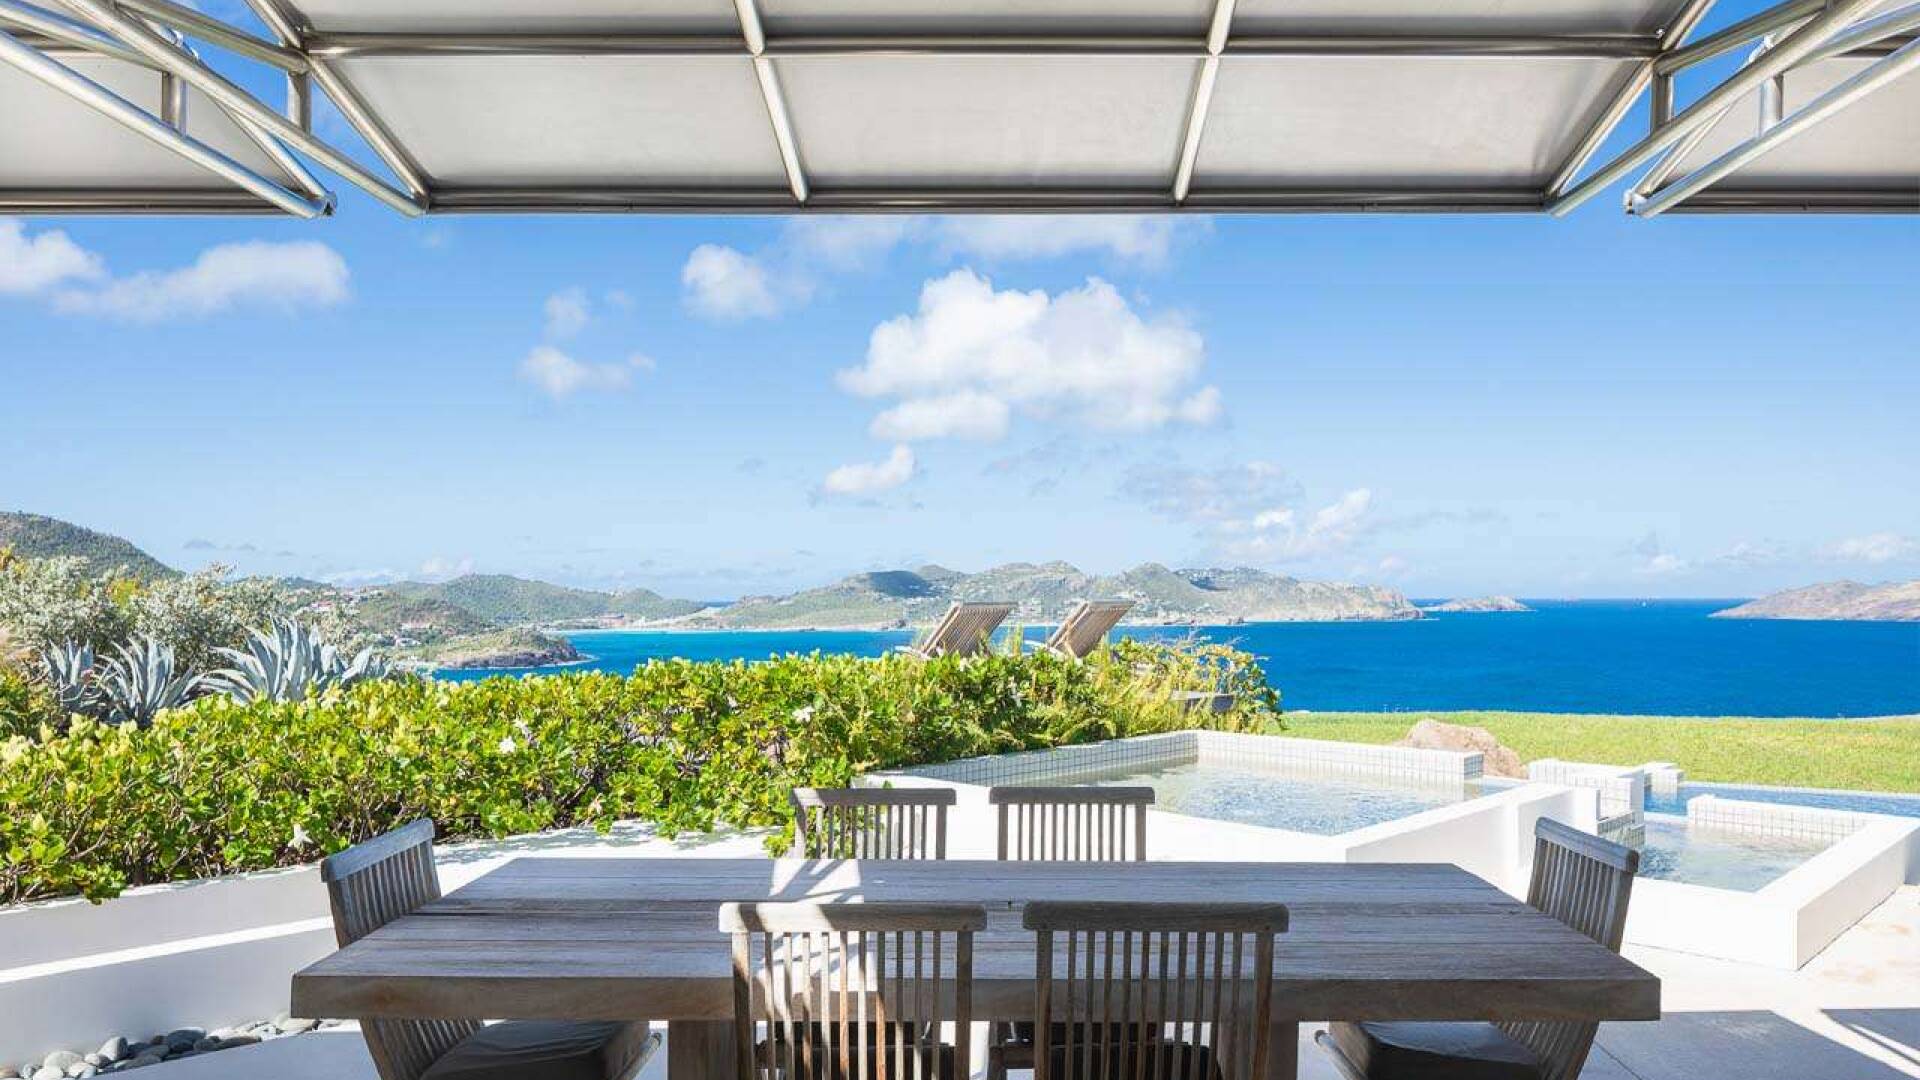 Terrace at WV SEA, Pointe Milou, St. Barthelemy